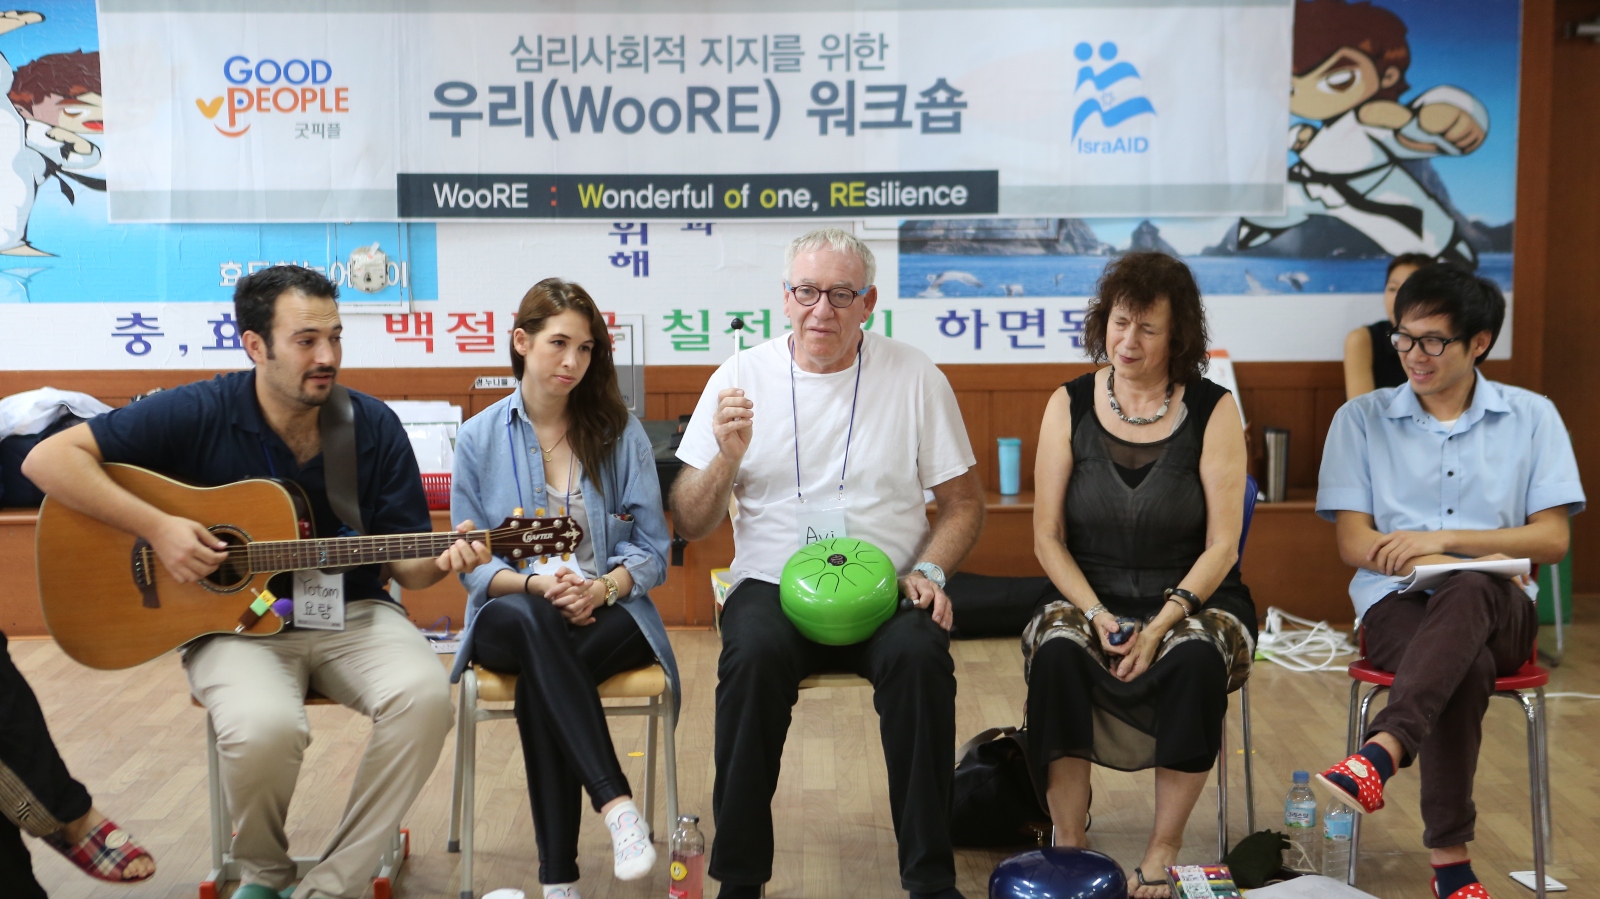 IsraAID helped provide psychosocial support training in South Korea during a previous crisis. Photo: courtesy